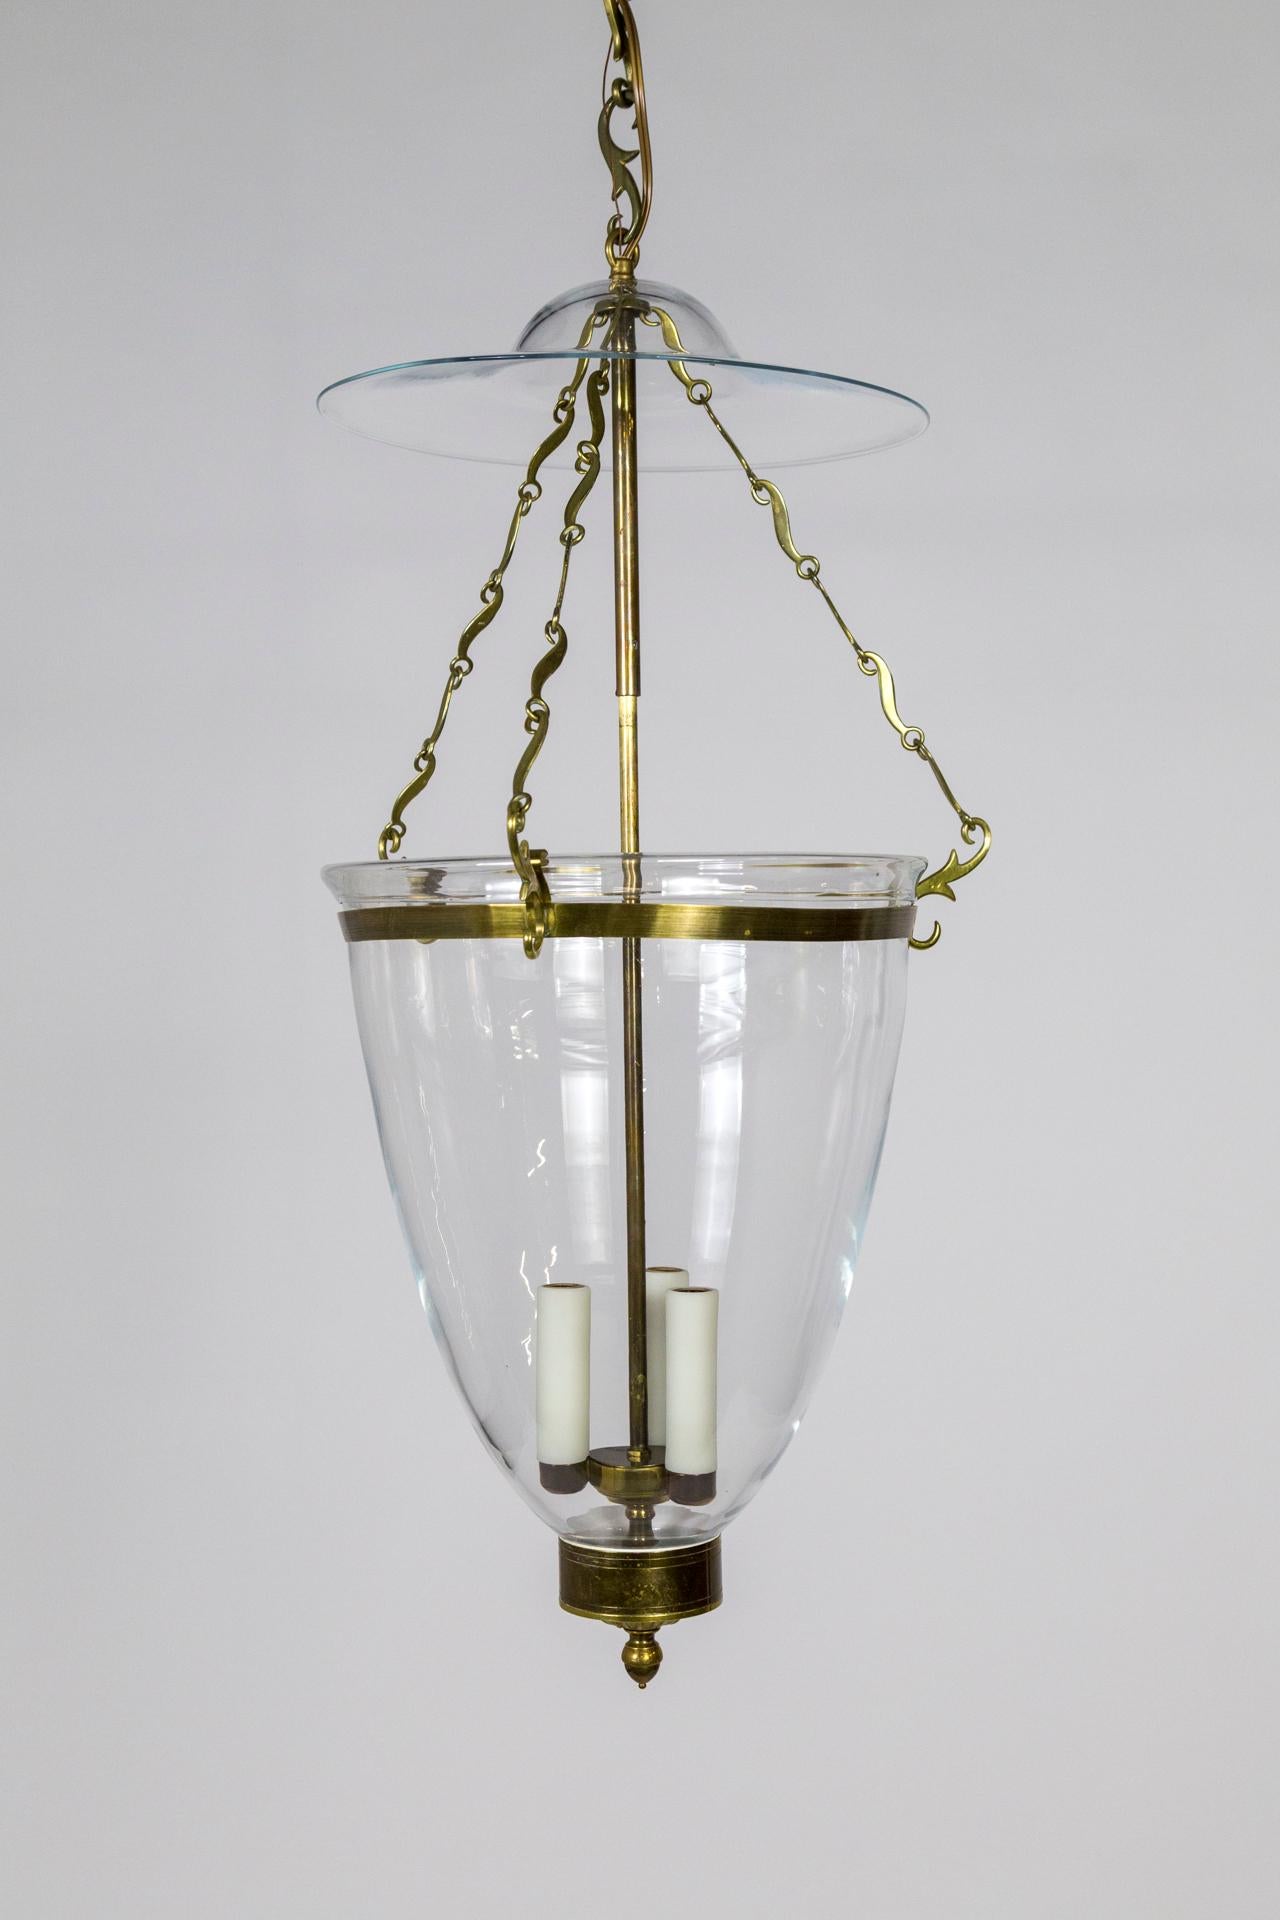 Belle Epoque Style Brass & Glass Bell Jar Lantern w/ Smoke Bell & Swirling Chain In Good Condition For Sale In San Francisco, CA